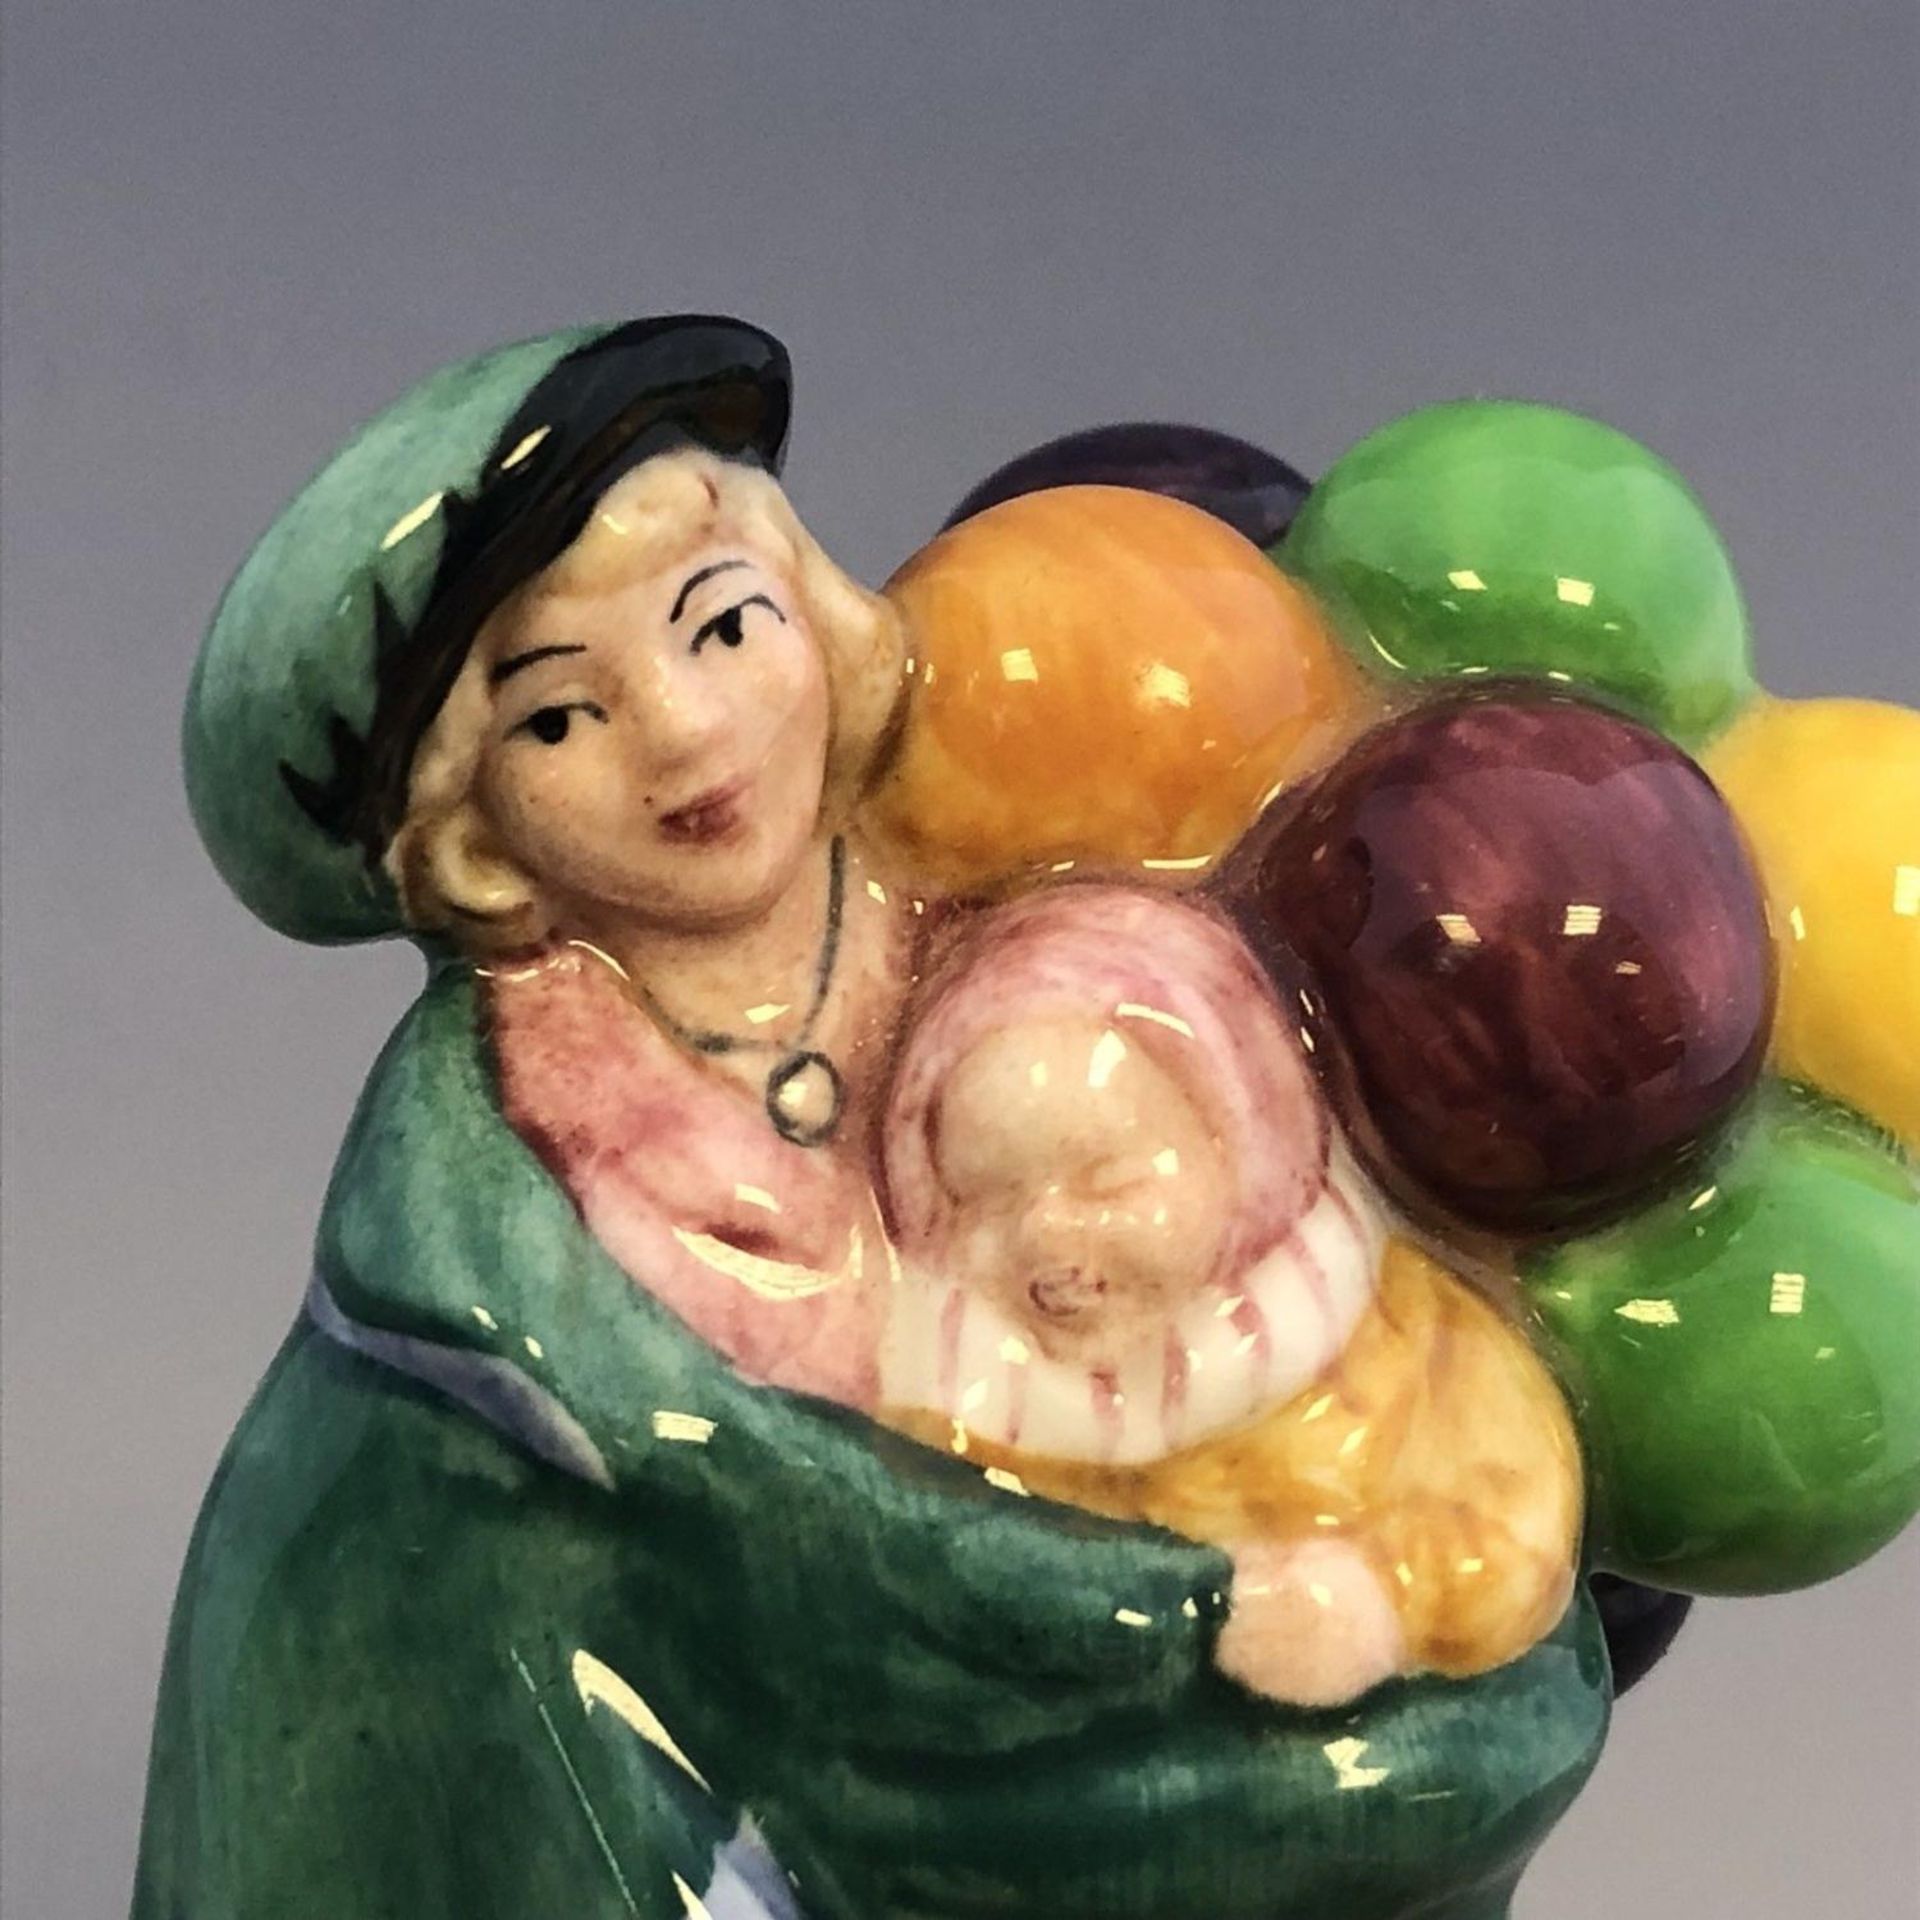 Miniature Royal Doulton Porcelain Figurine - HN 2130 THE BALLOON SELLER with baby - Image 6 of 6